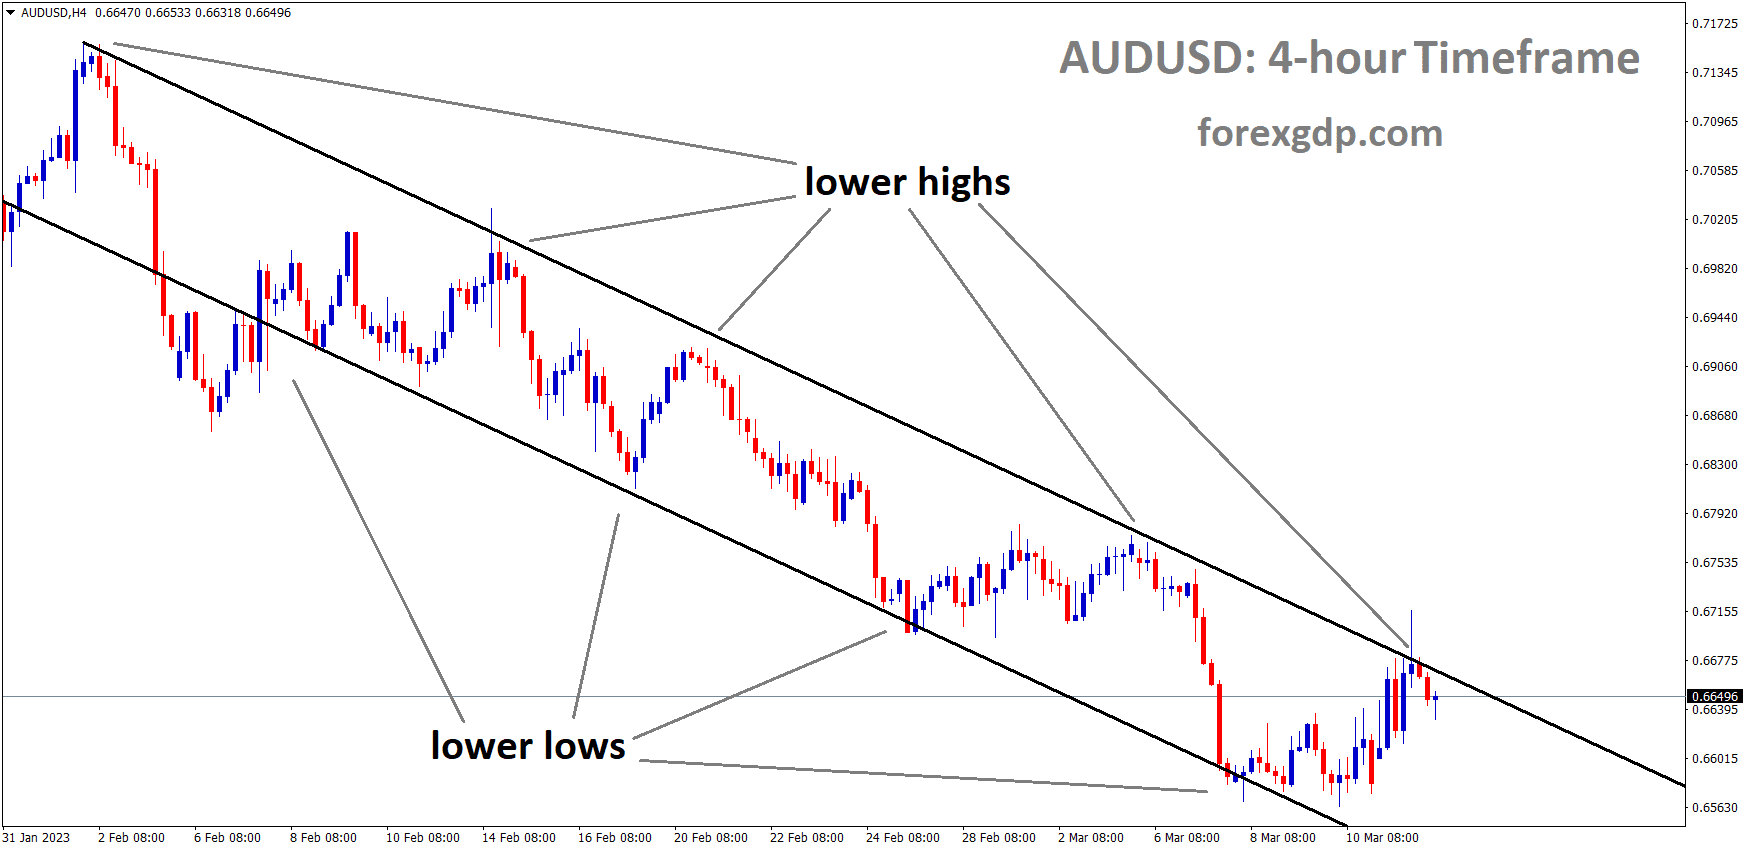 AUDUSD H4 TF analysis Market is moving in the Descending channel and the market has reached the lower high area of the channel